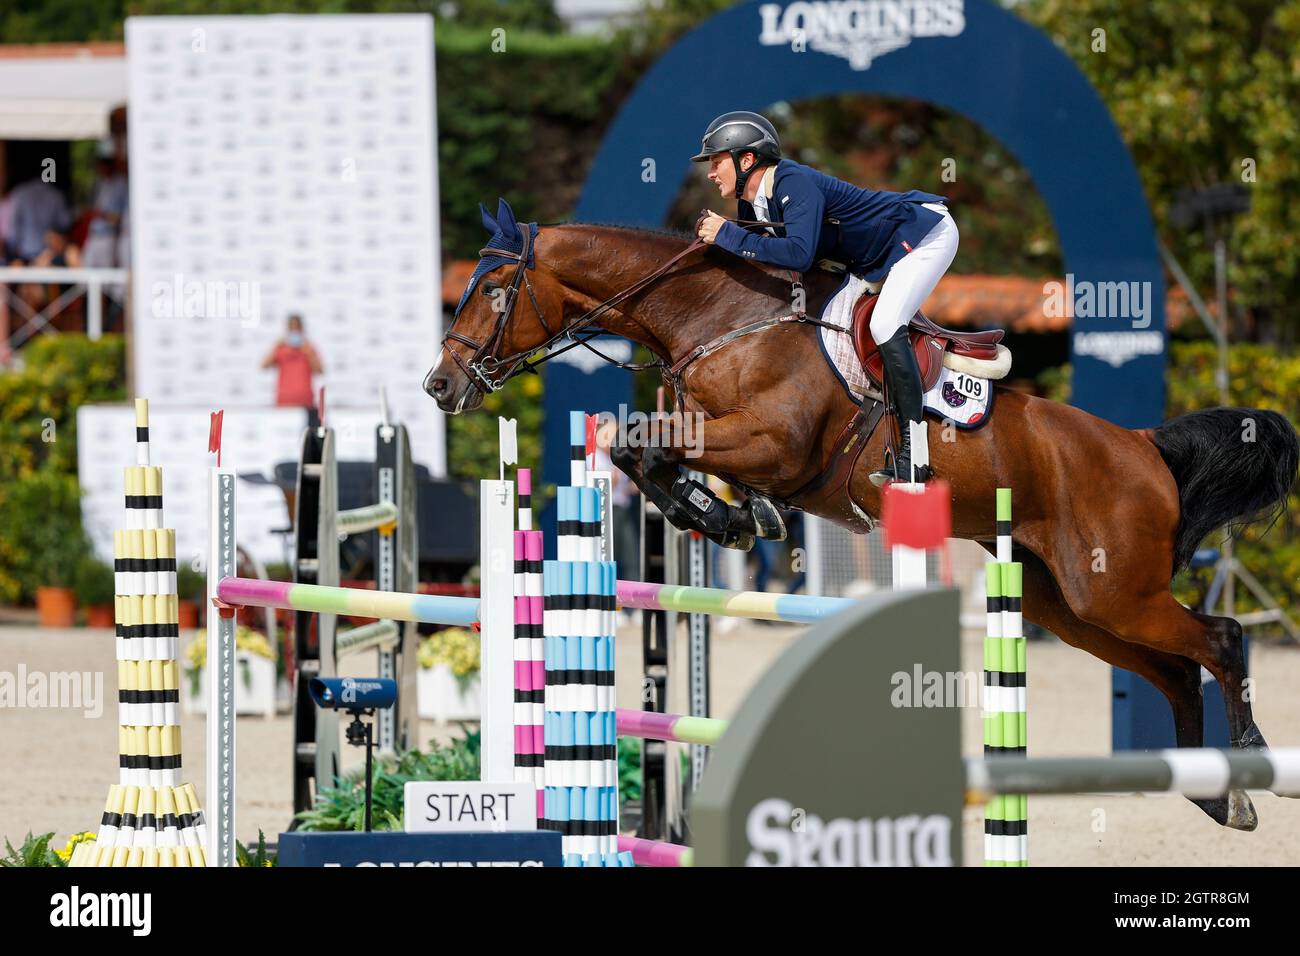 Michael Duffy of Ireland riding RMF Charly during the CSIO Barcelona: Longines FEI jumping Nations Cup at Real Club de Polo of Barcelona. Stock Photo